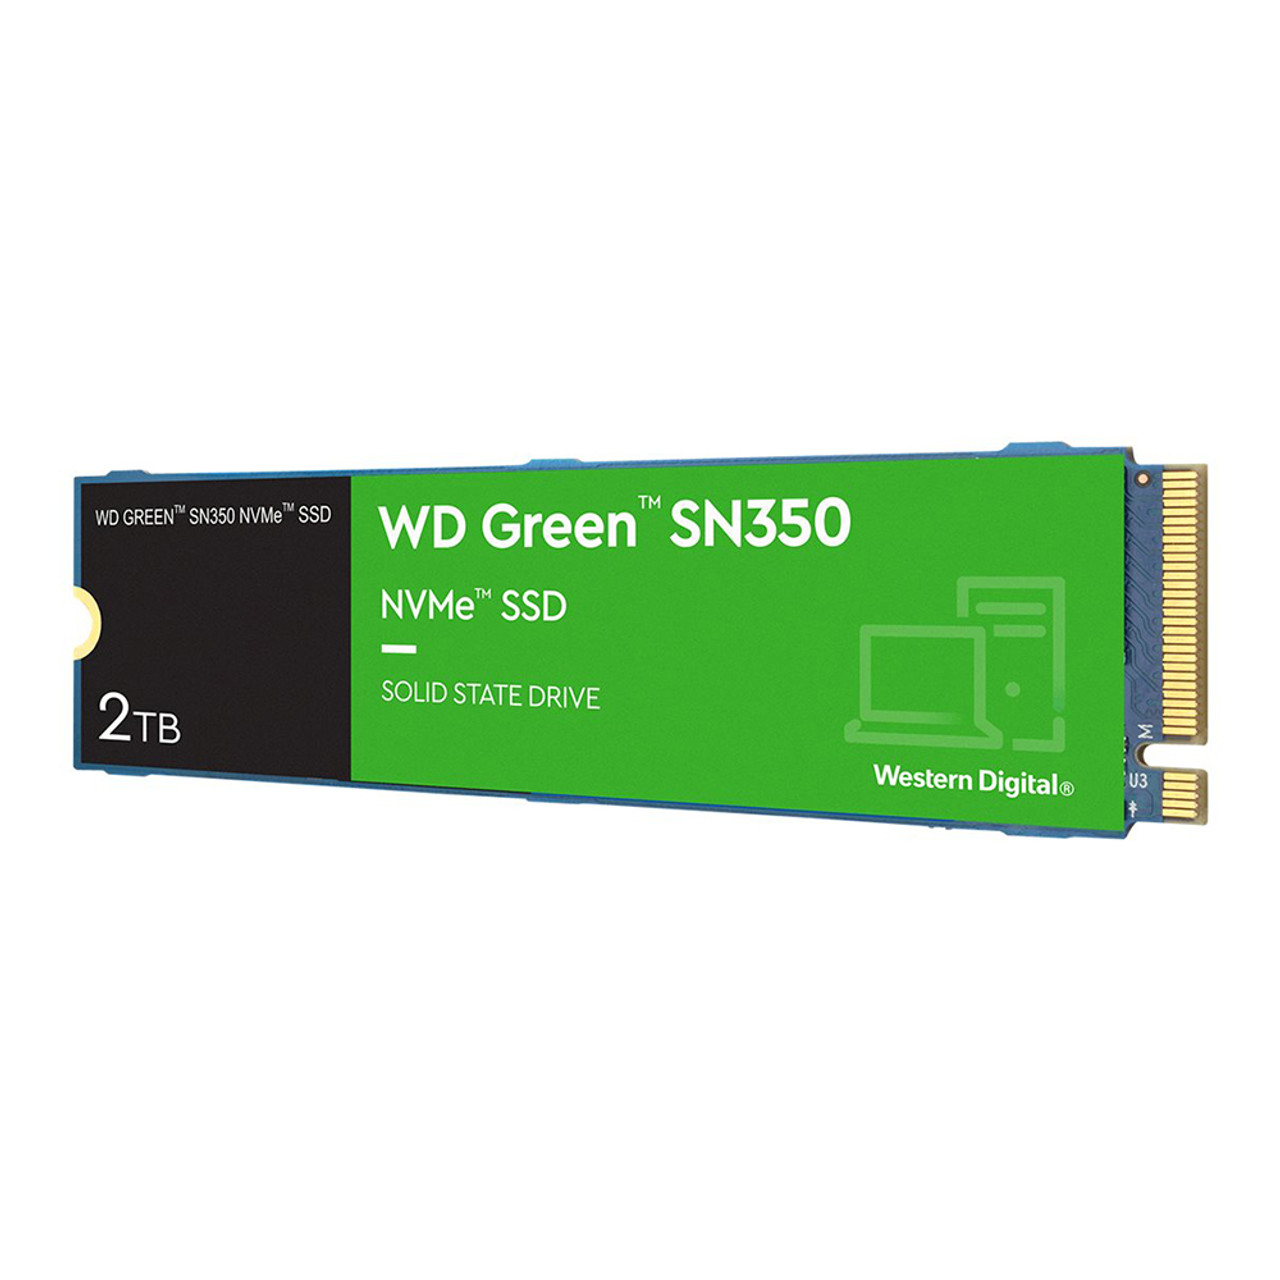 WD 2TB WD Green SN350 NVMe Internal SSD Solid State Drive - Gen3 PCIe, QLC, M.2 2280, Up to 3,200 MB/s WDS200T3G0C